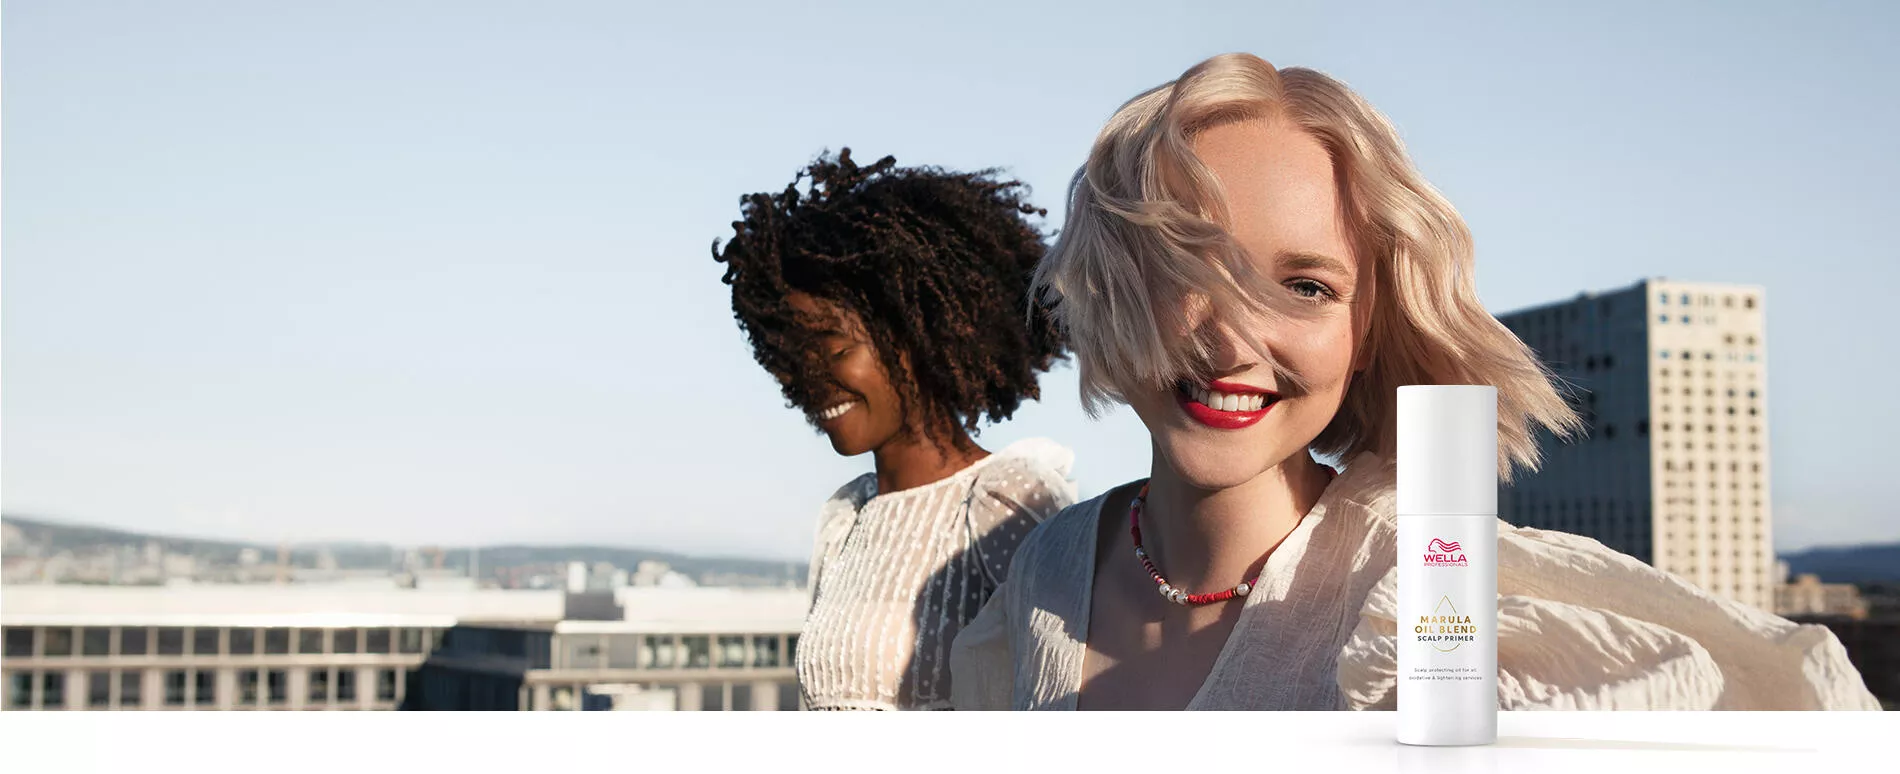 Girl with short blonde hair and girl with textured hair photographed on a rooftop, and bottle of Marula Oil Blend Scalp Primer in the foreground